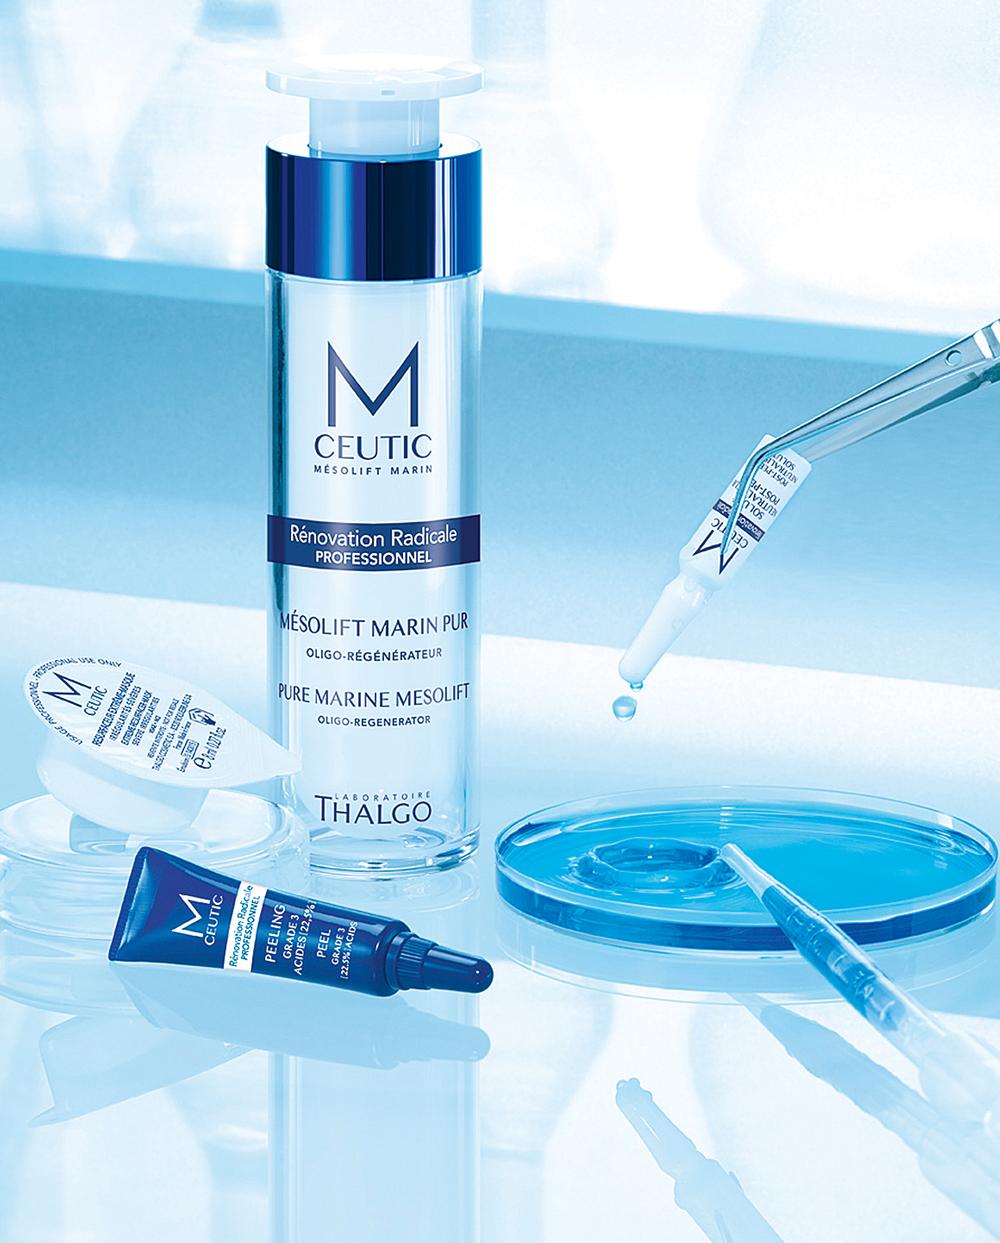 MCeutic is Thalgo’s first cosmeceutical brand, which will enable facilities to attract a whole new set of customers